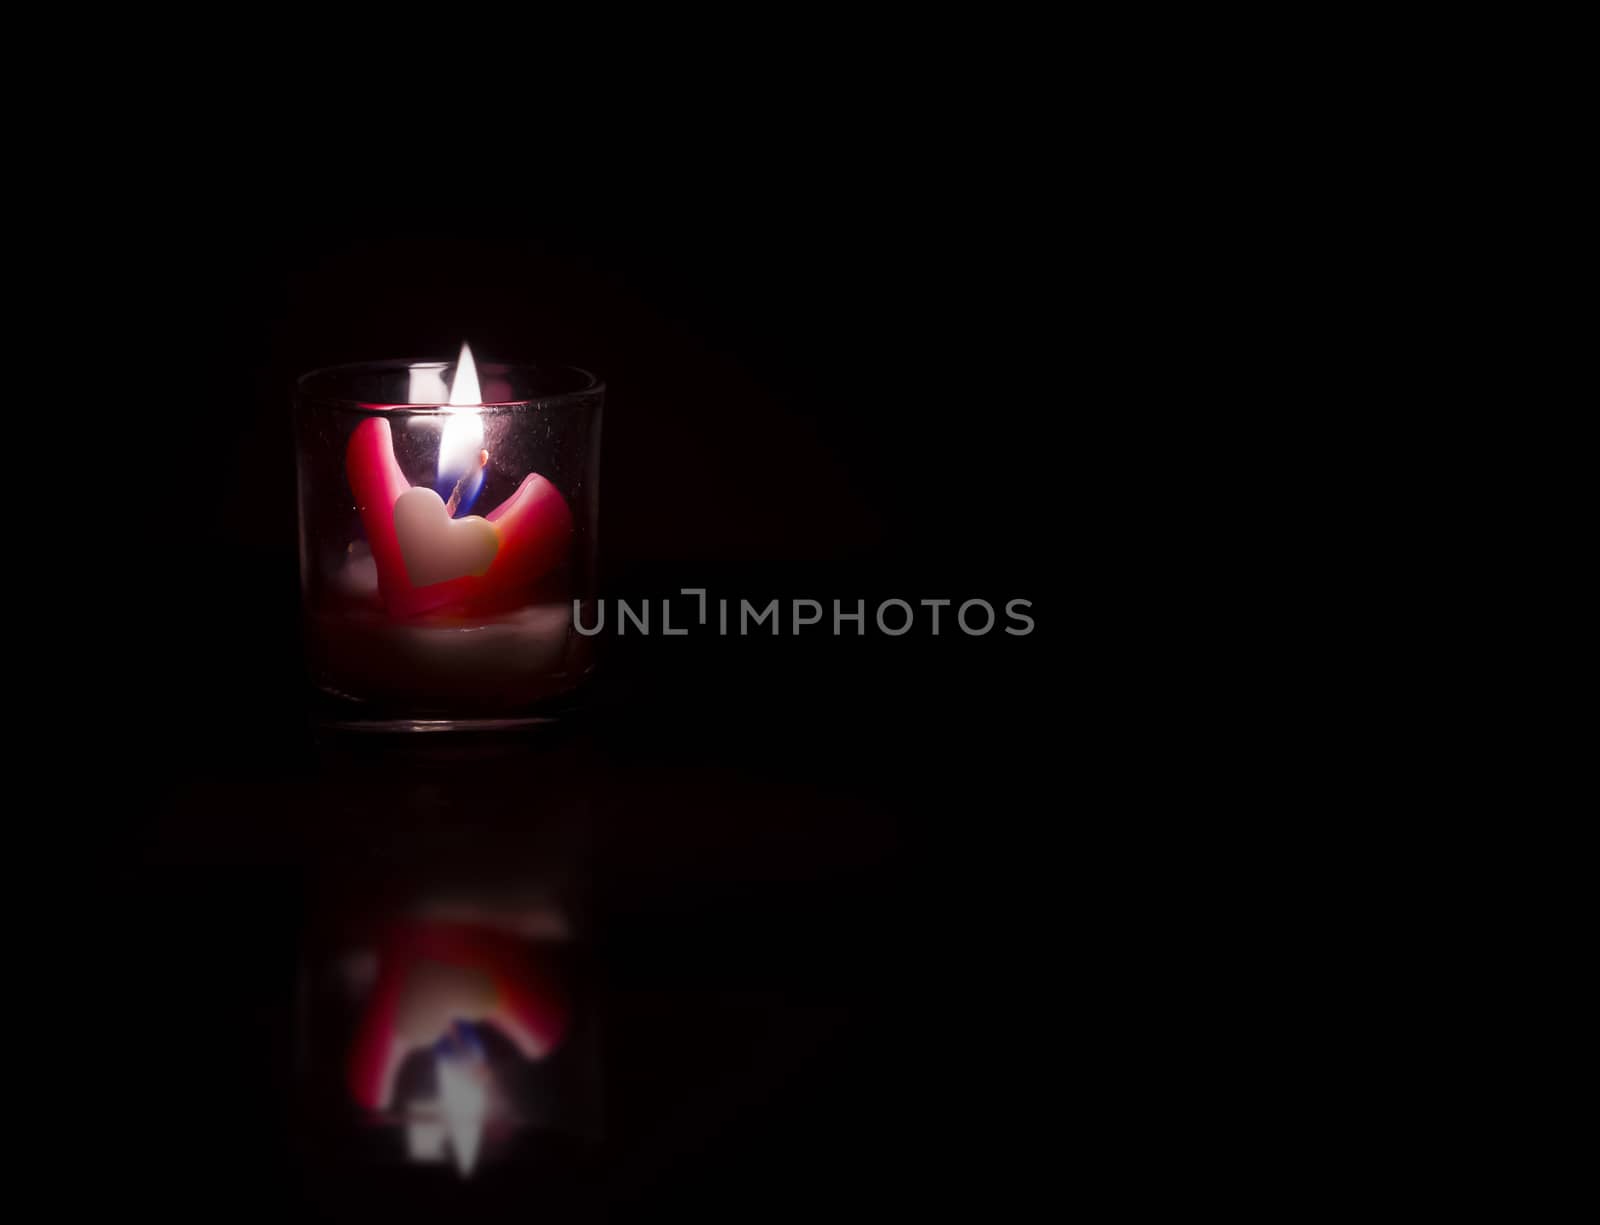 Heart shaped candles on black background by anatskwong